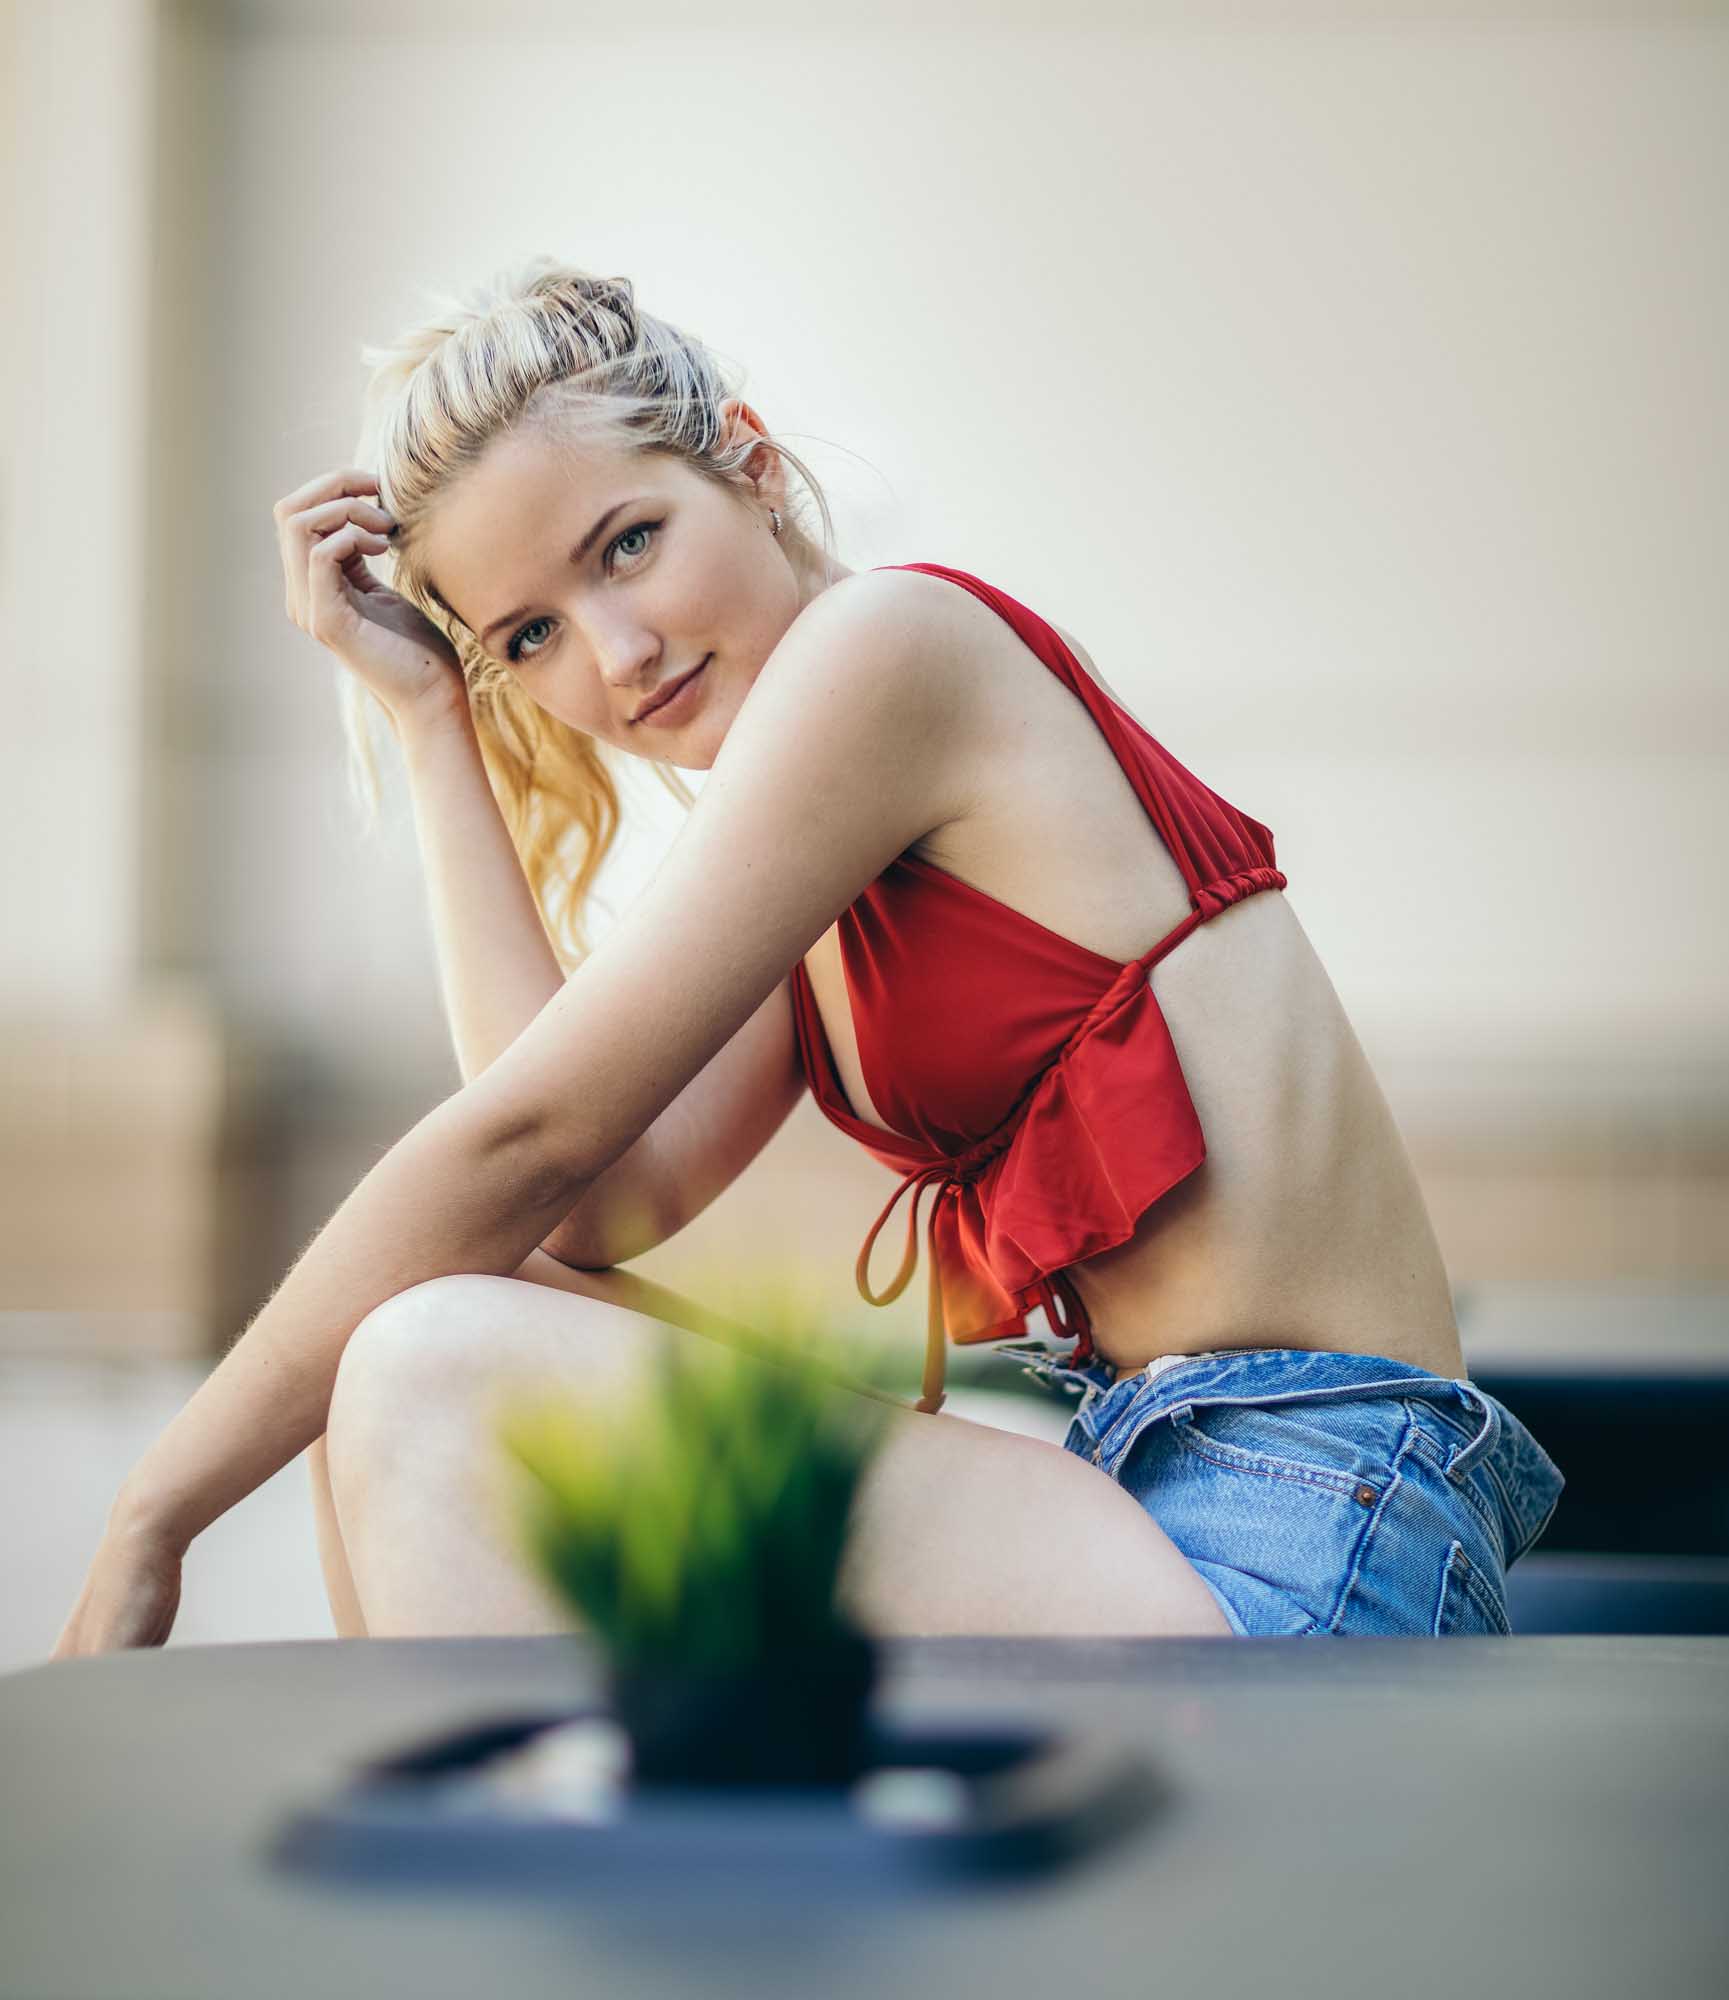 Model in red top and short jean shorts  | Meghan Travers @traversmeghan  | Fashion Photography | Denver, Colorado